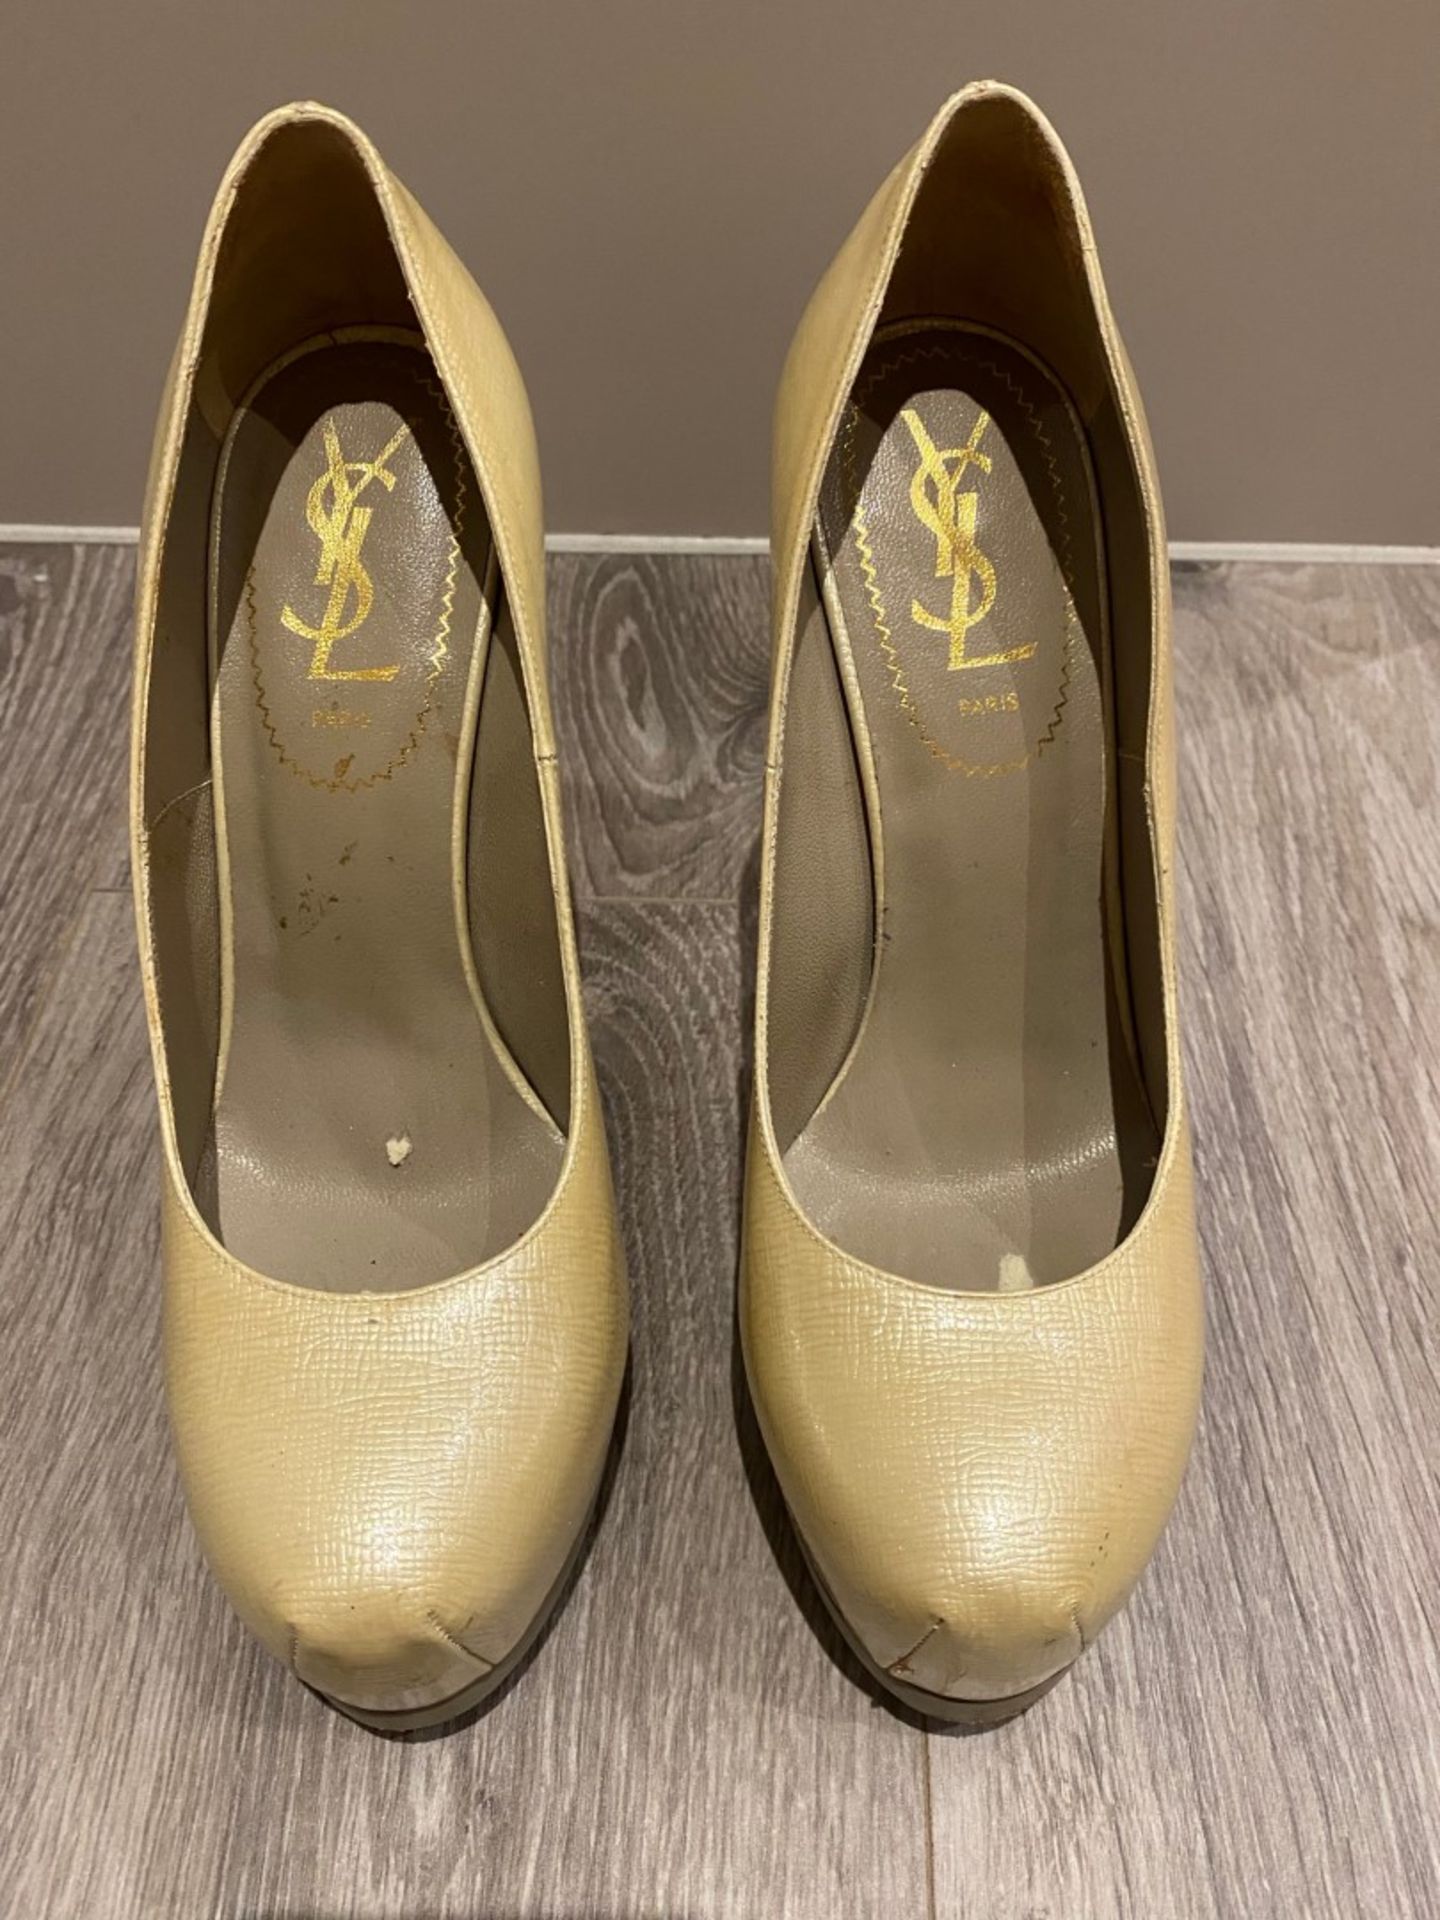 1 x Pair Of Genuine YSL High Heel Shoes In Champagne - Size: 36 - Preowned in Worn Condition - Ref: - Image 3 of 5